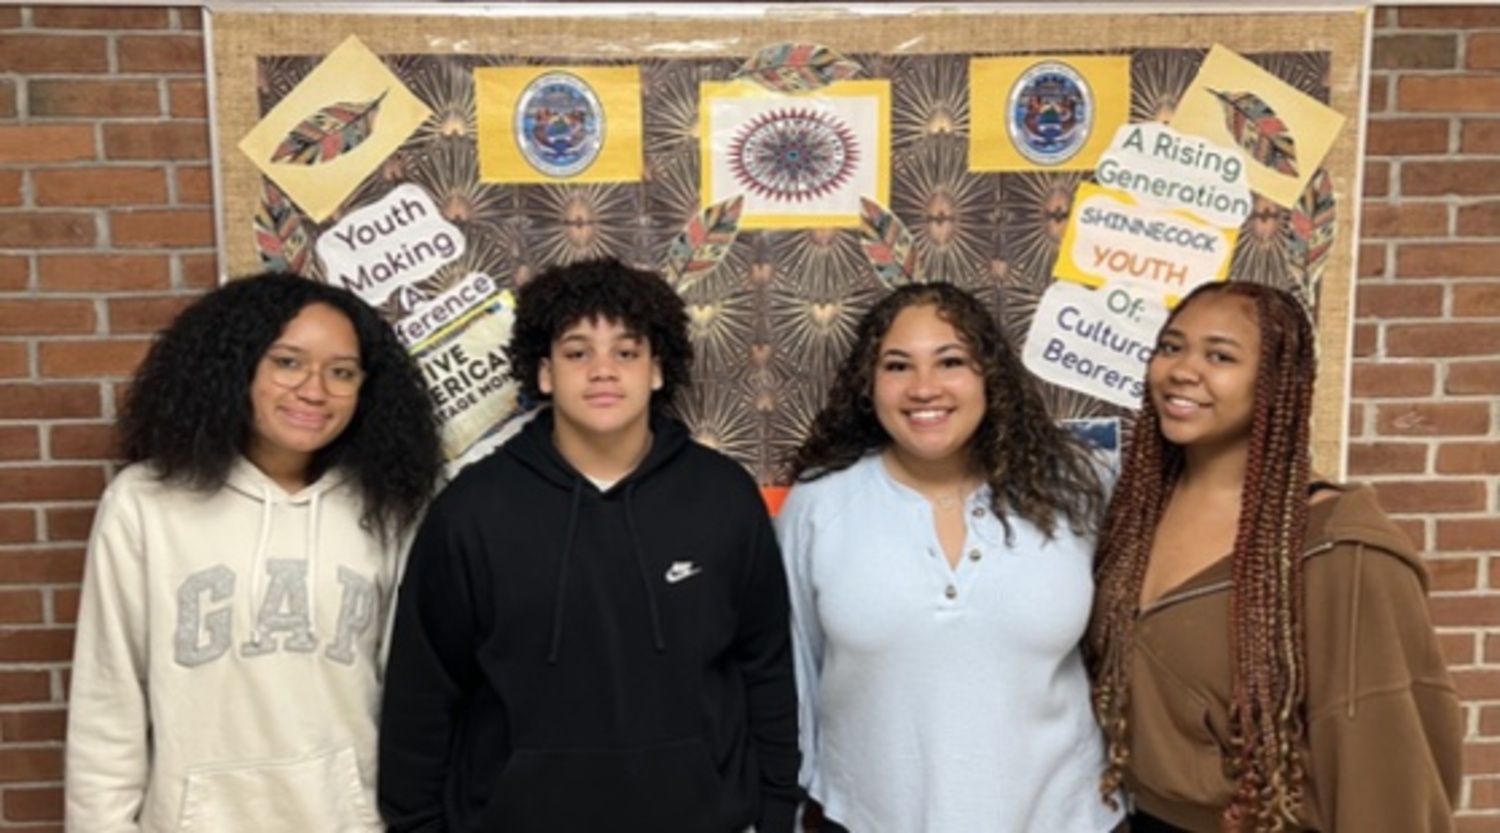 Four Southampton students,  London Bess, Sa’Naya Morris, Taylor Robinson and Dyson Smith, had the opportunity to participate in the College Horizons program in Atlanta, Georgia, during the summer. COURTESY SOUTHAMPTON SCHOOL DISTRICT